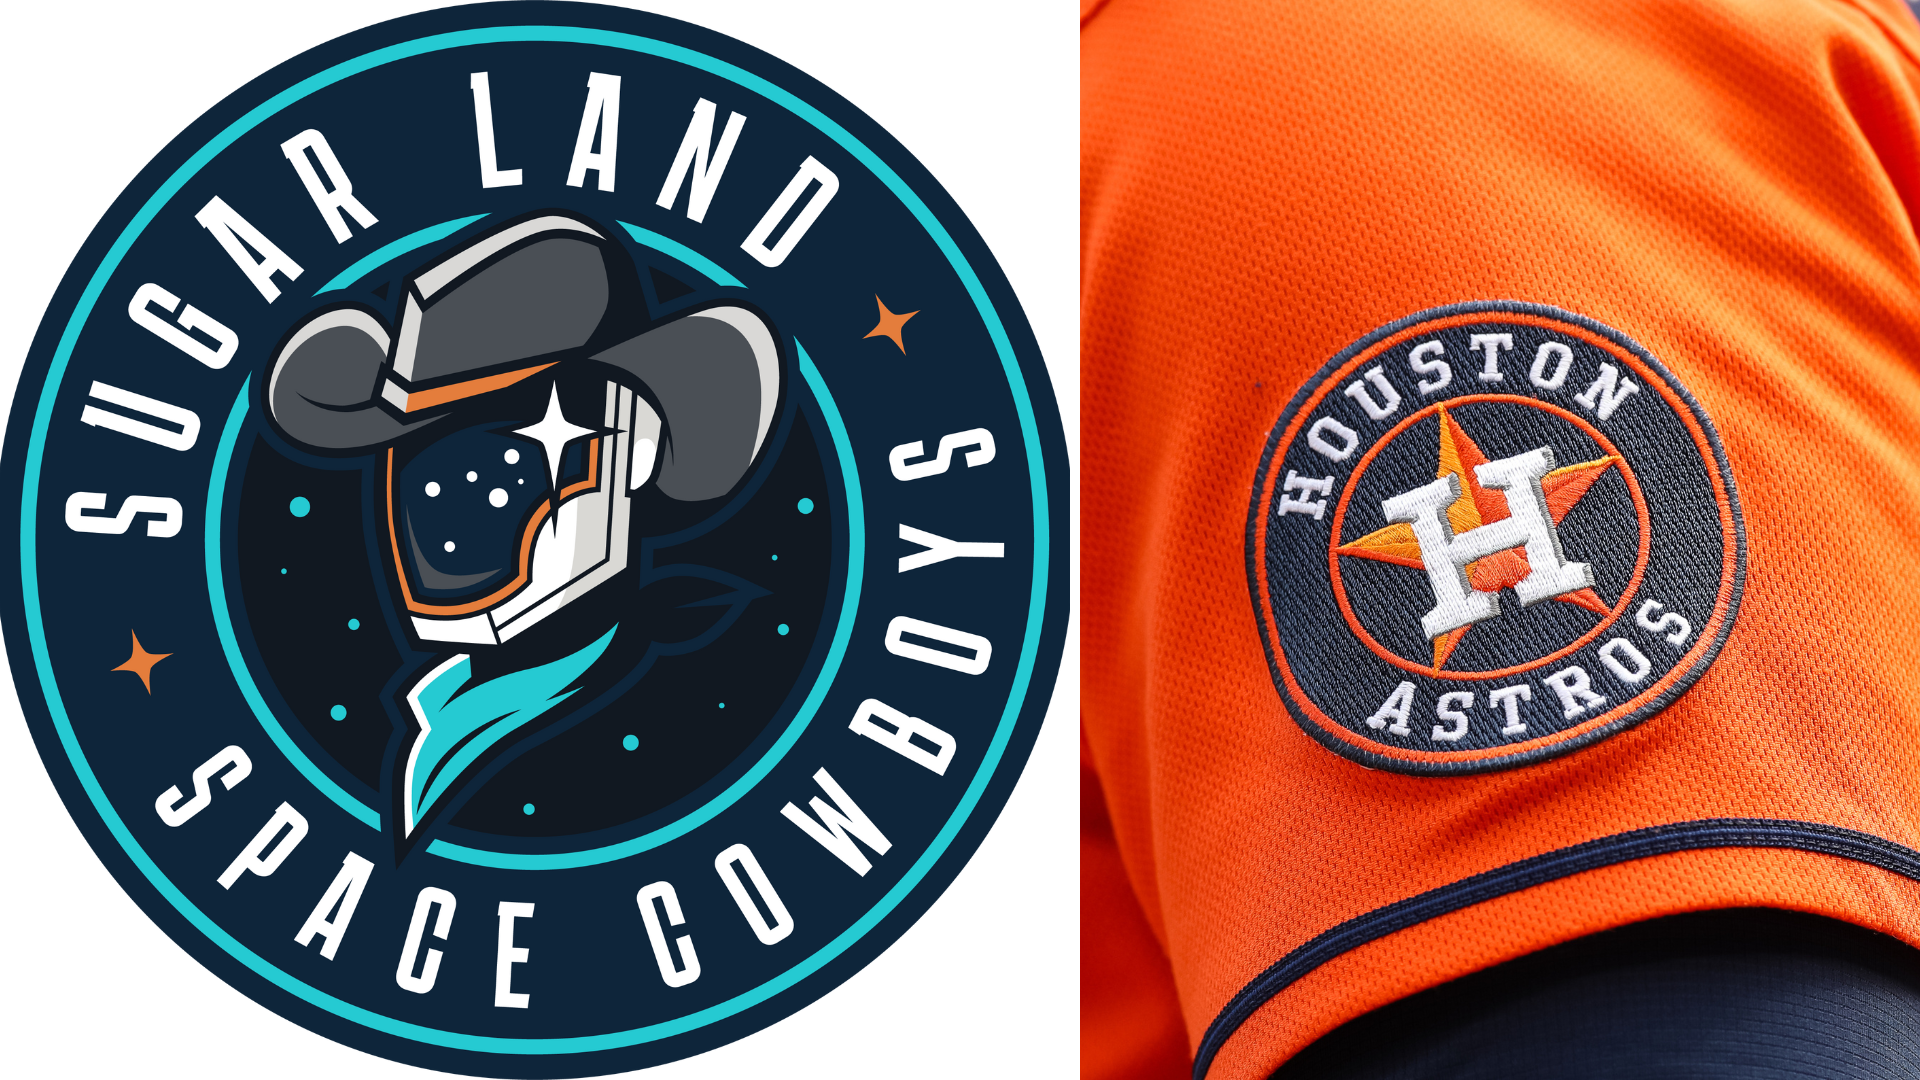 Sugar Land Space Cowboys to host the Houston Astros in series of